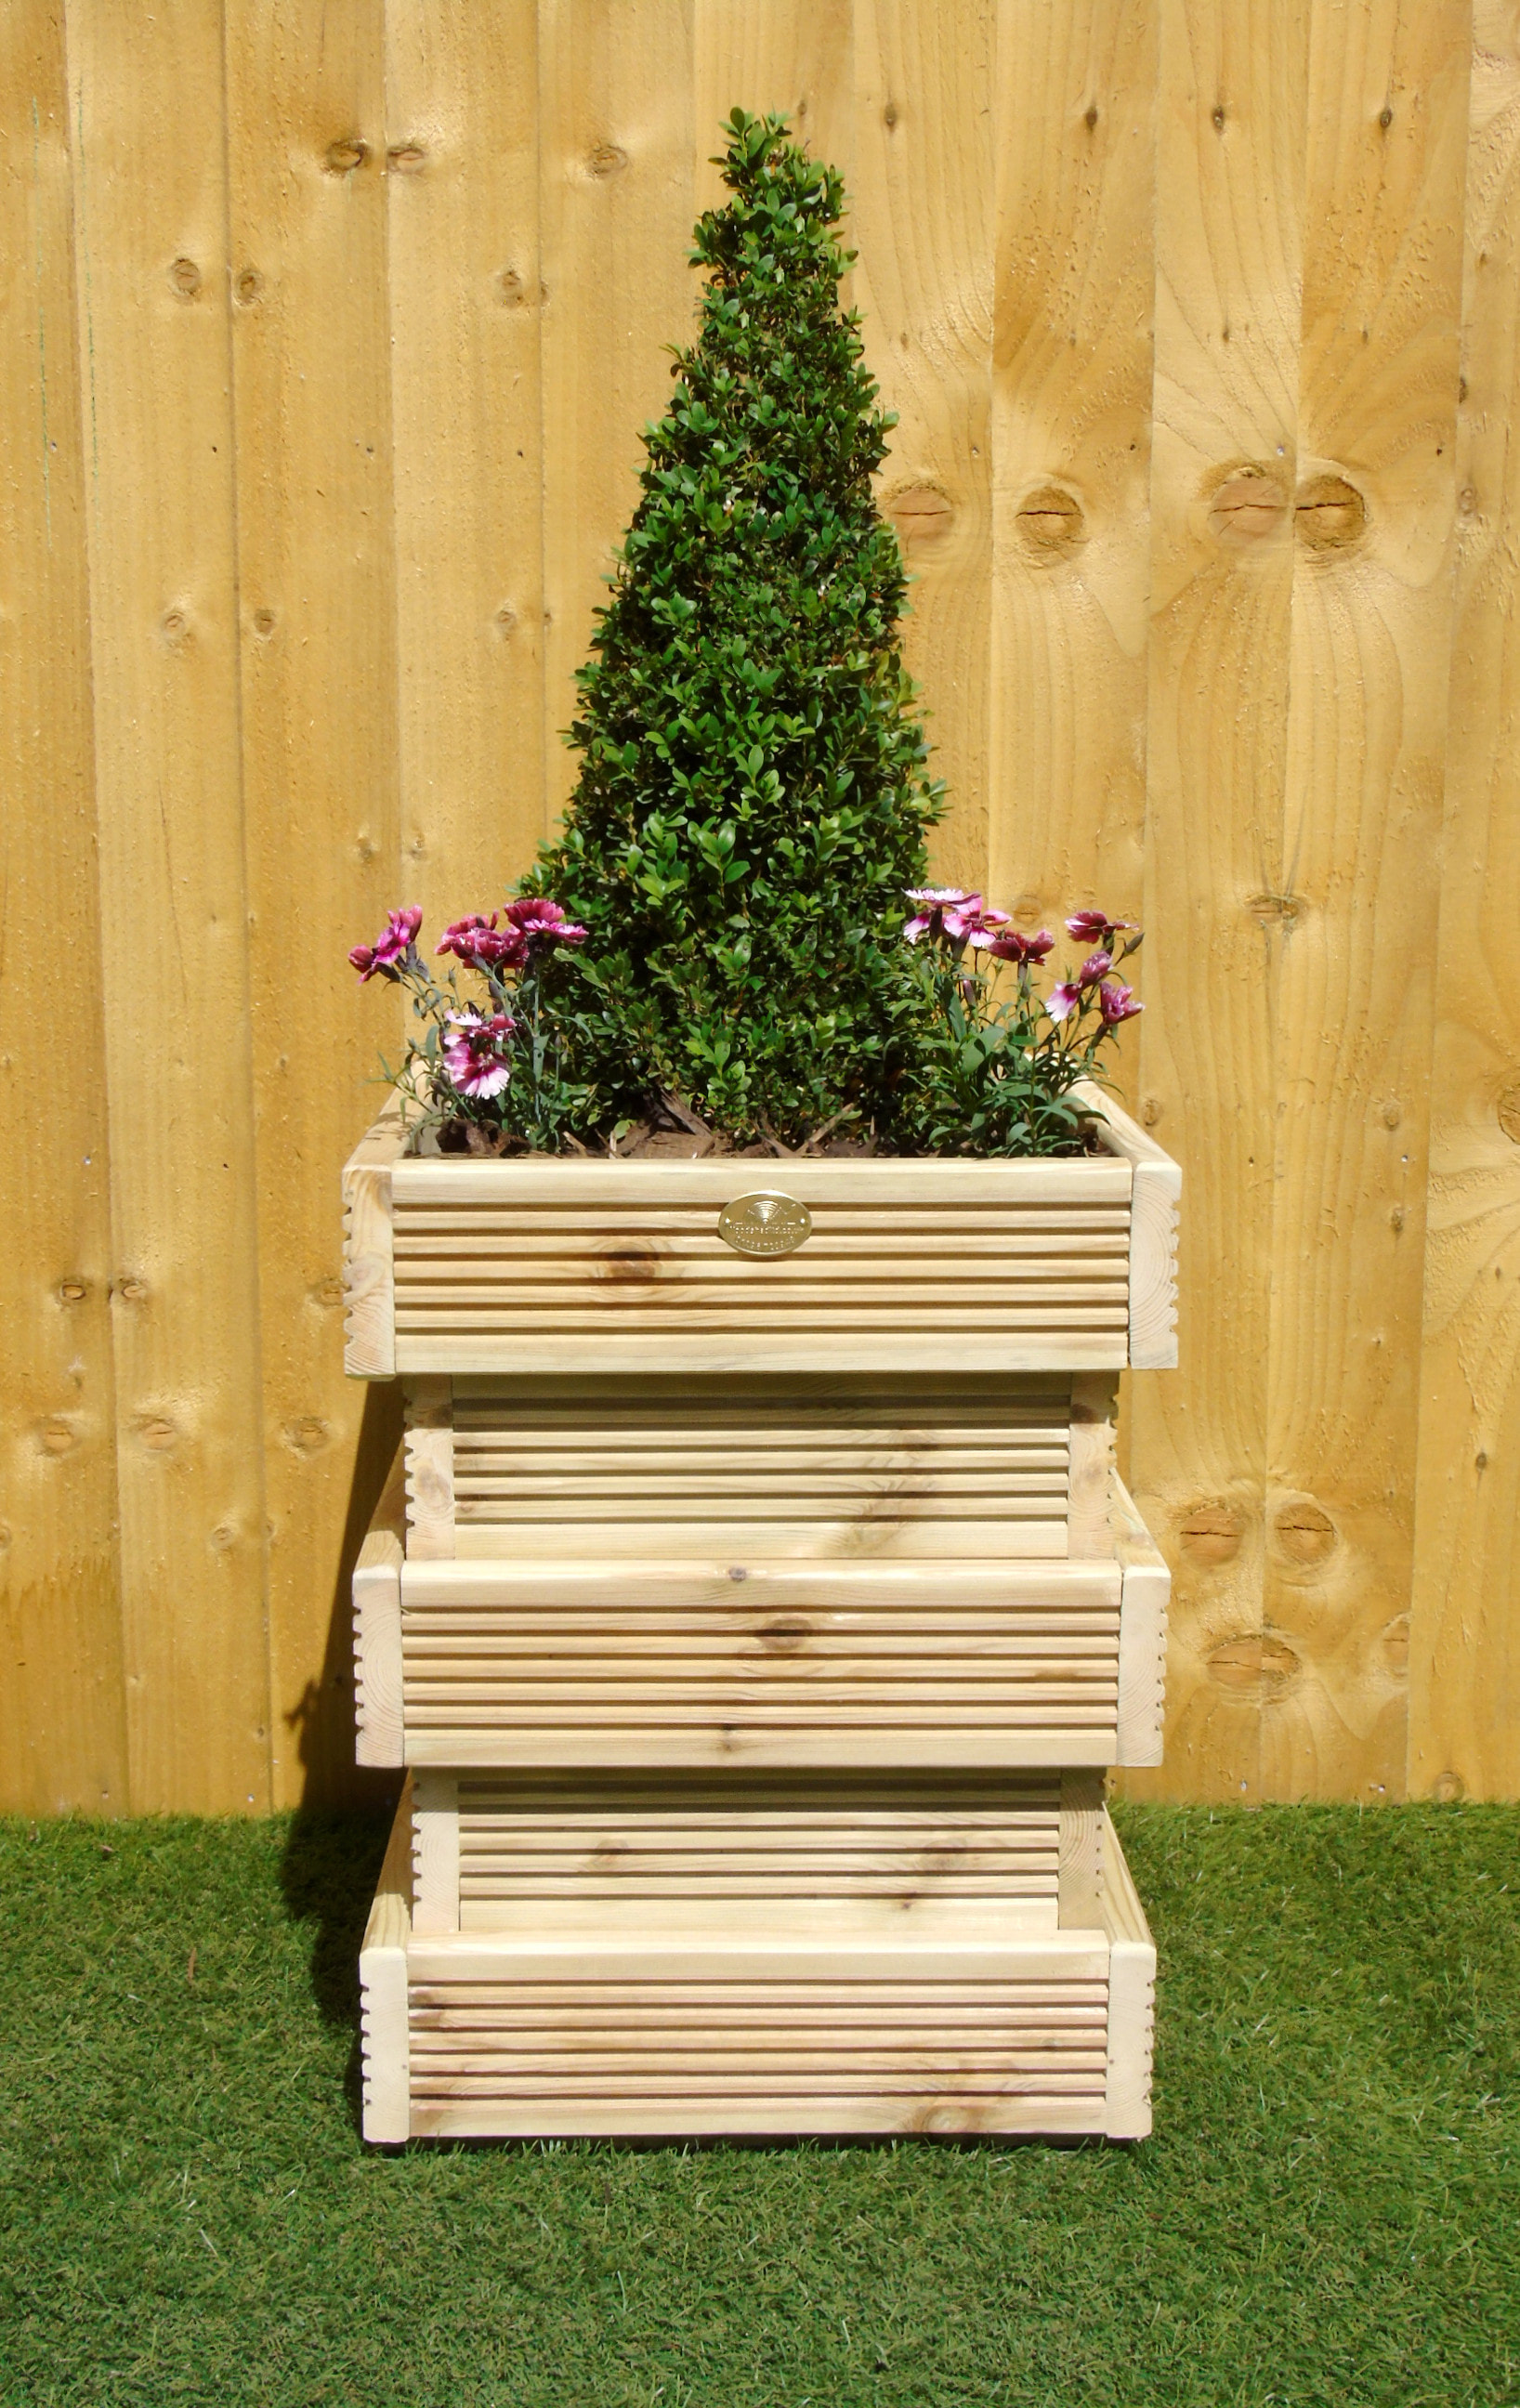 Commercial Square Beehive Bush Decking Garden Treated Planter Shrub Tower 